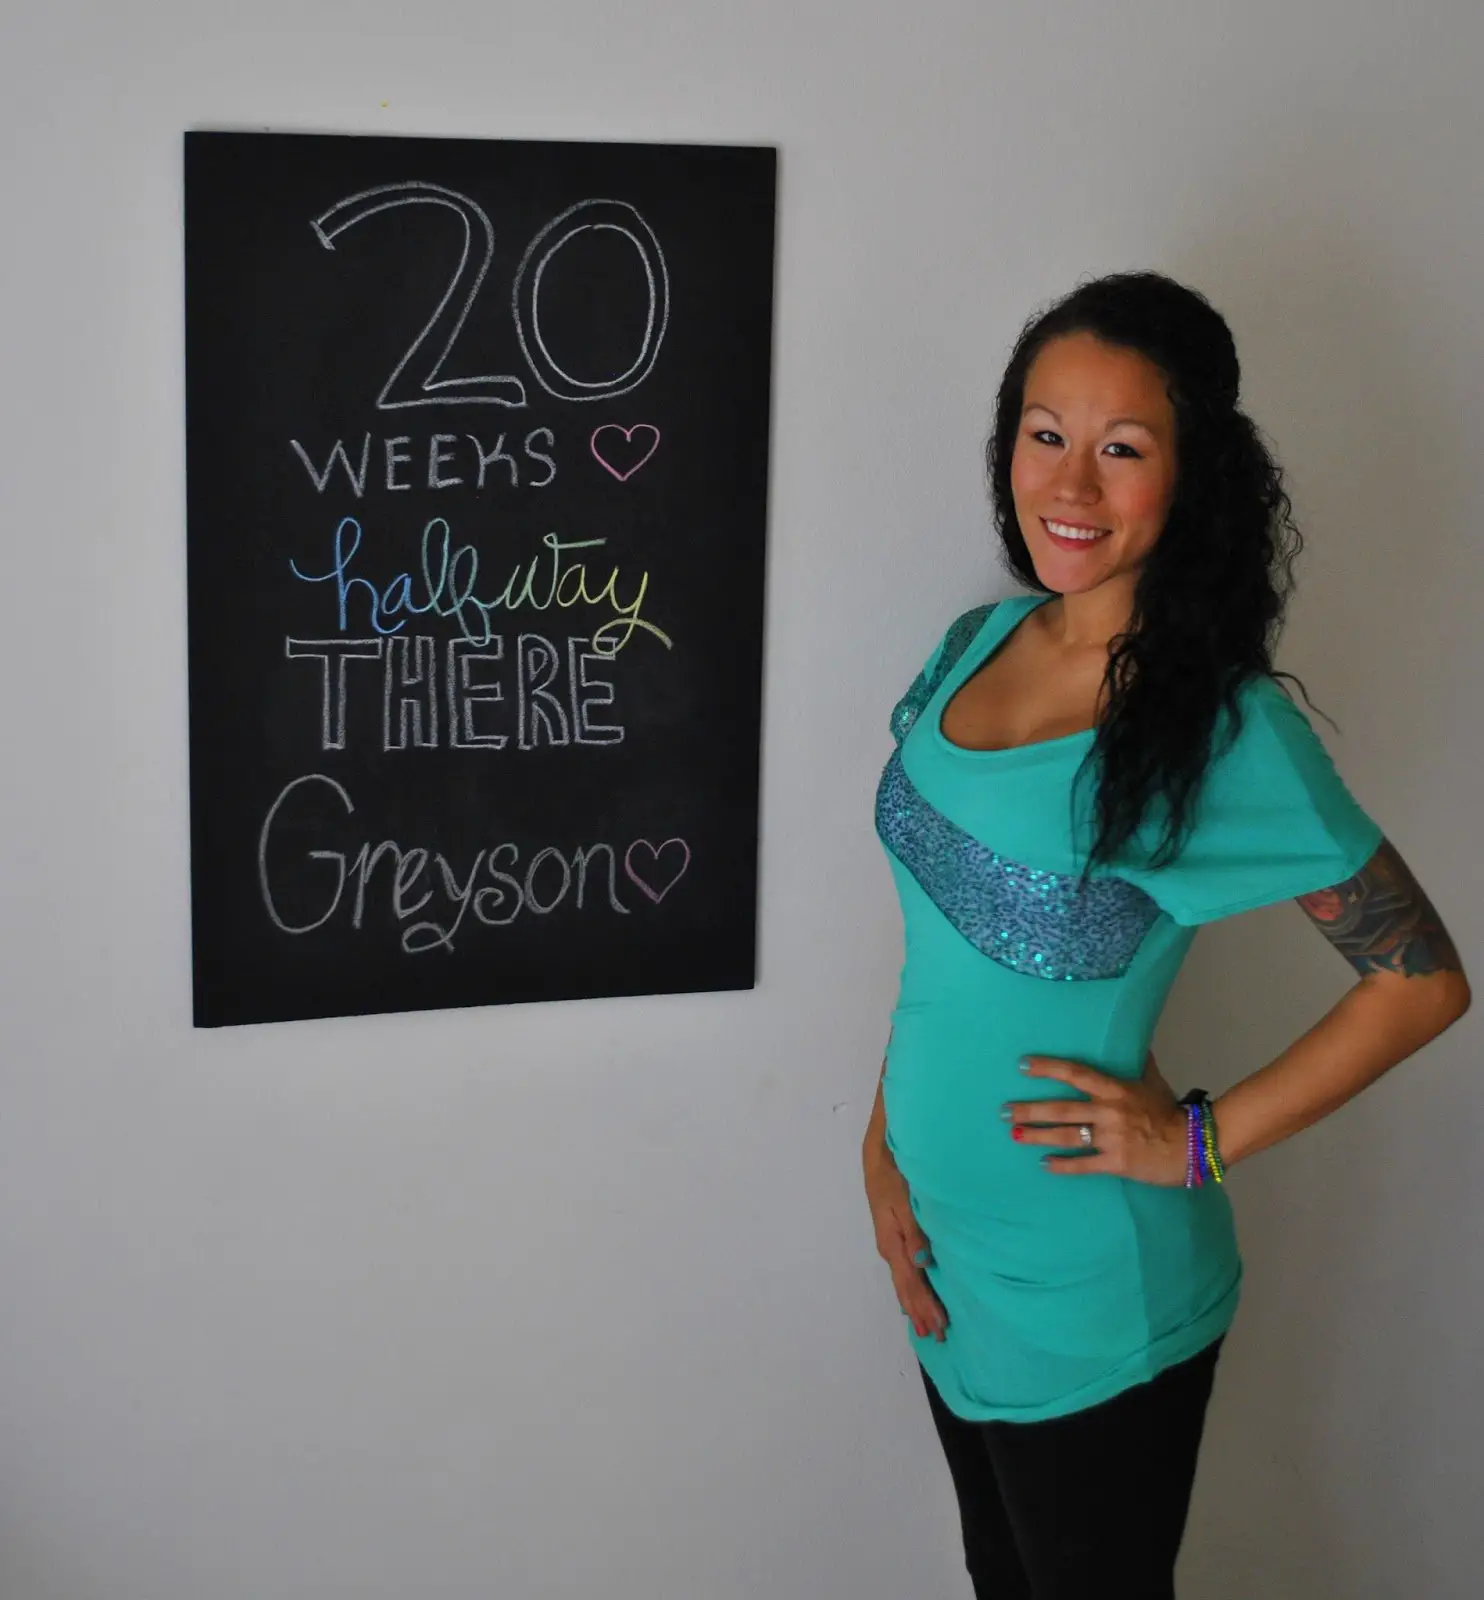 Diary of a Fit Mommy: 20 Weeks Pregnancy Chalkboard Update